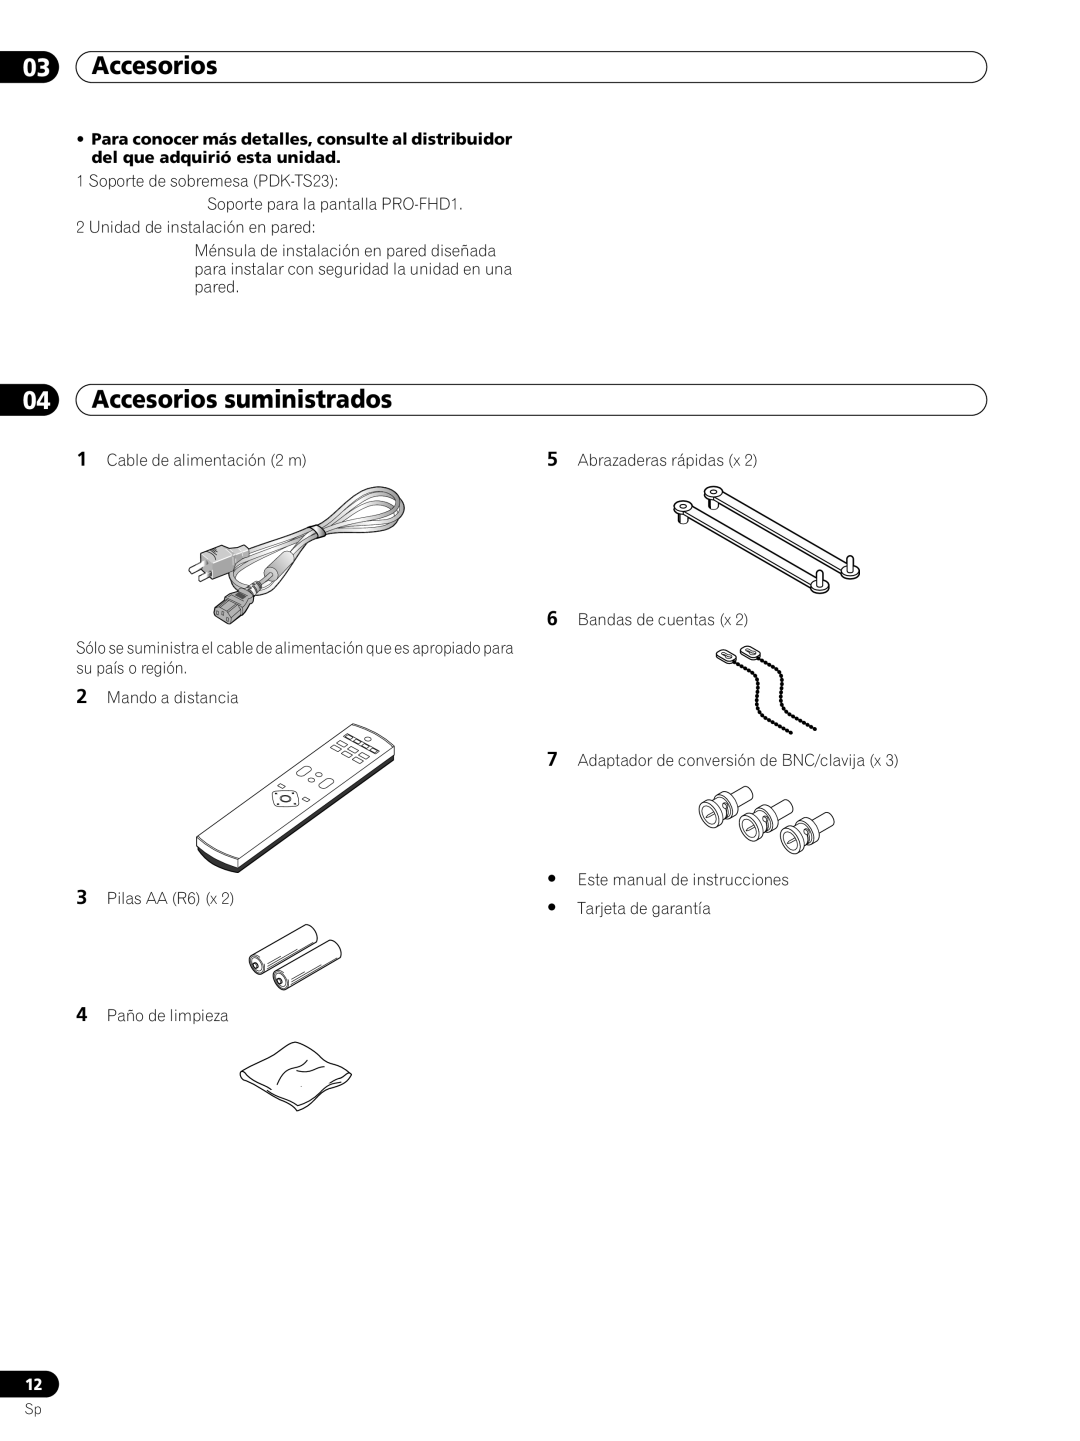 Pioneer PRO-FHD1 operating instructions Accesorios suministrados, Accesorios Accesorios 